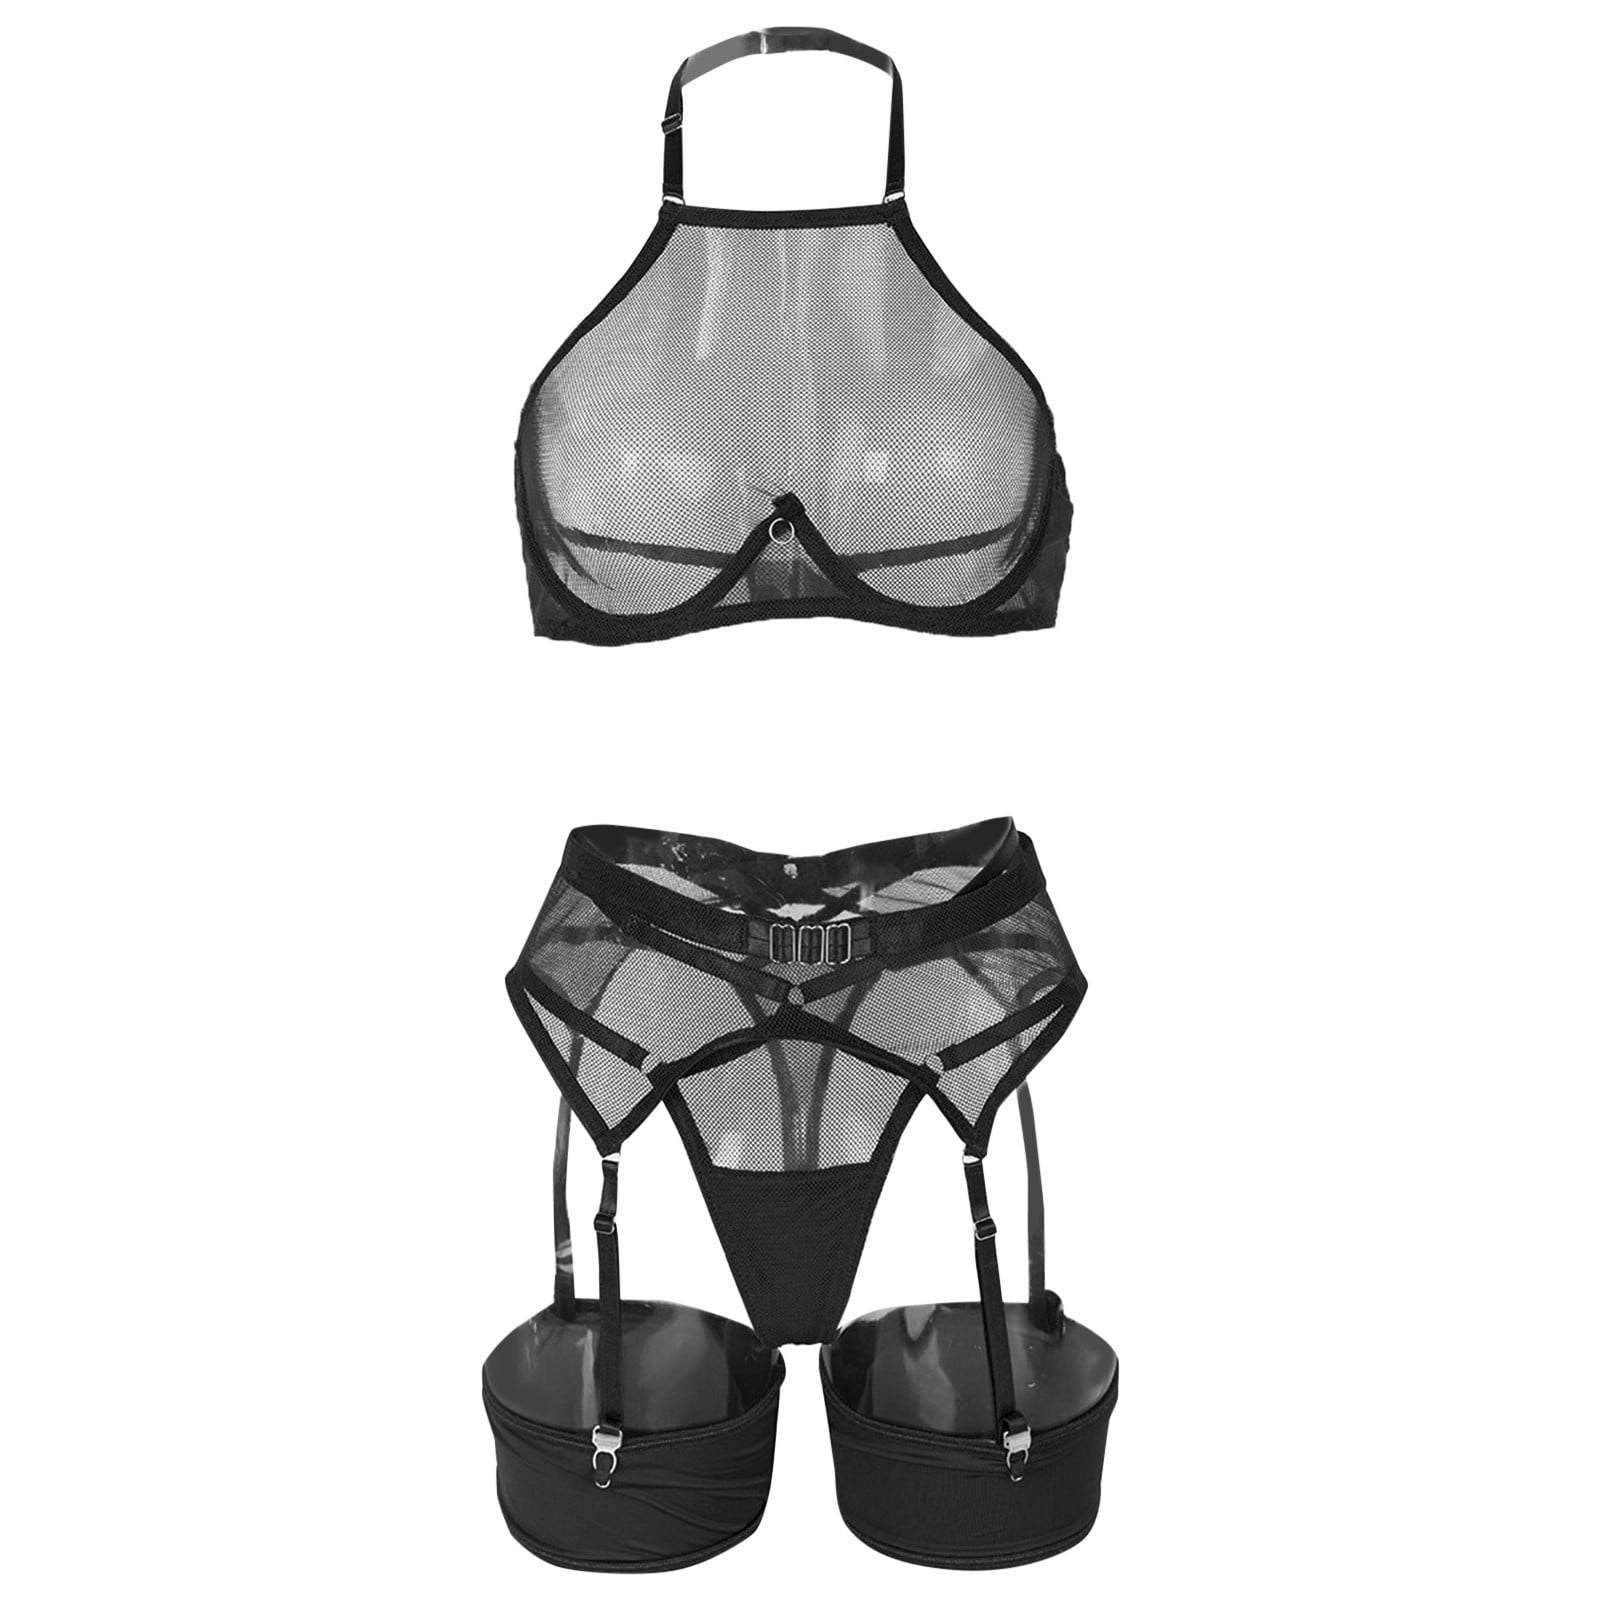 Aayomet Lingerie For Women Plus Size Women Lingerie Set with